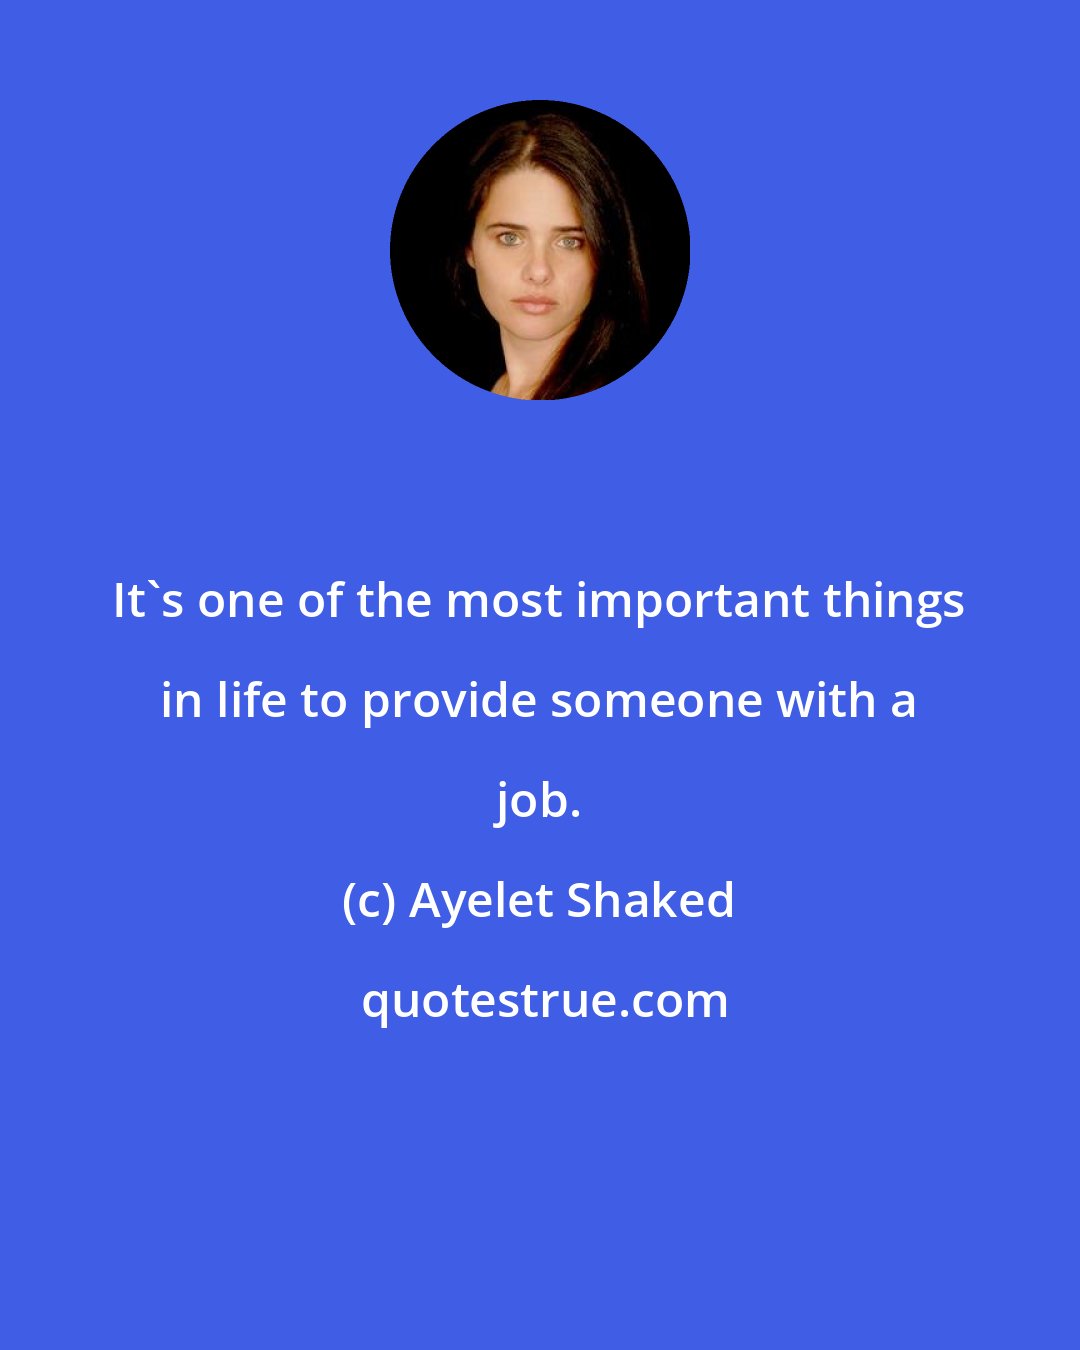 Ayelet Shaked: It's one of the most important things in life to provide someone with a job.